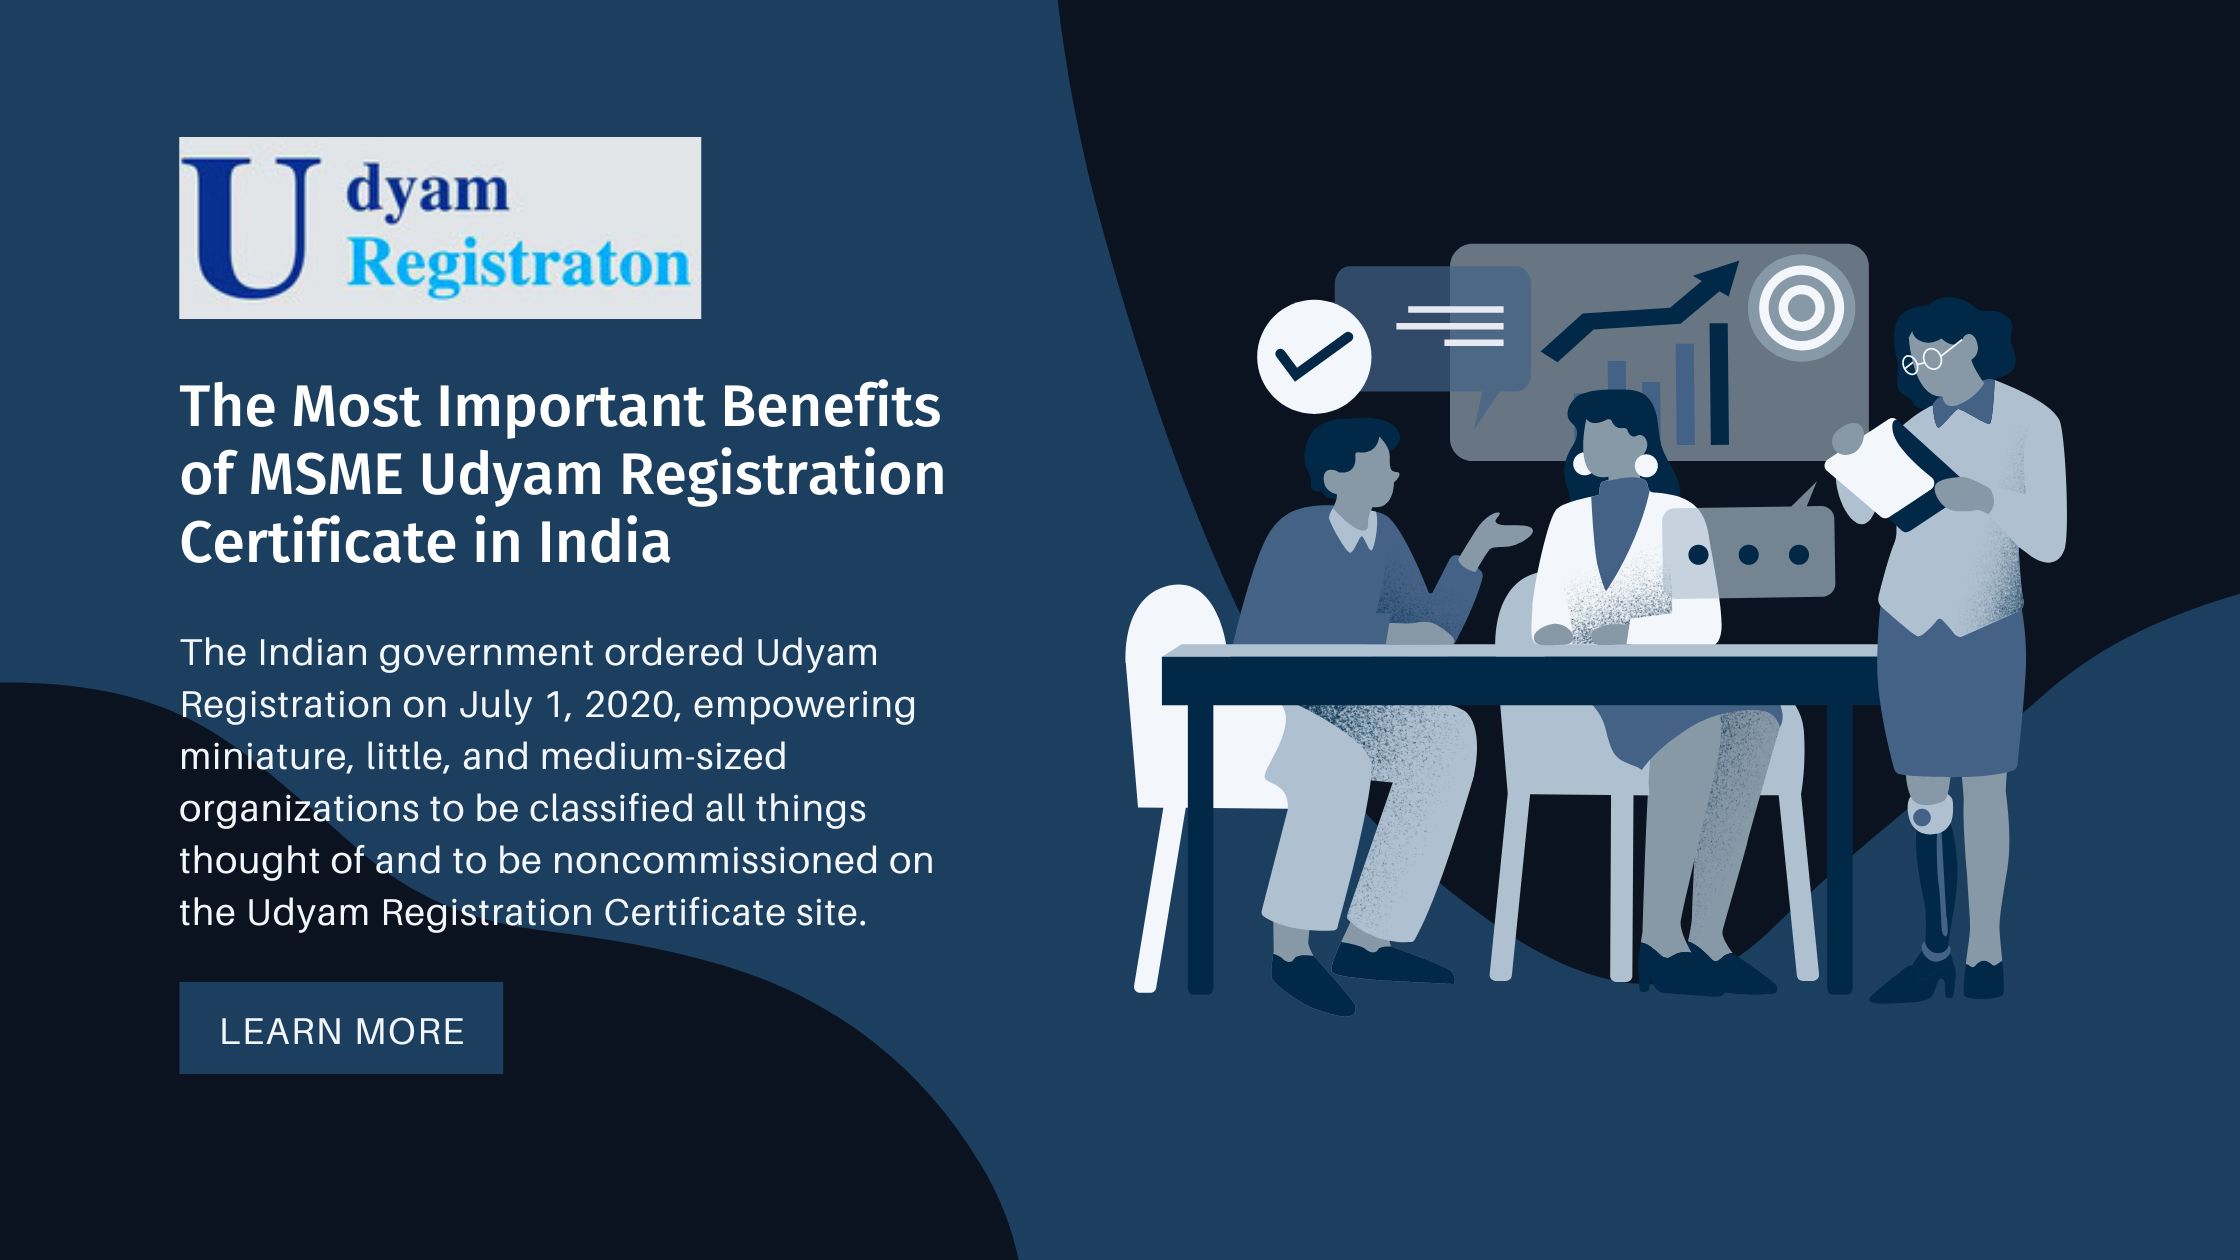 The Most Important Benefits of MSME Udyam Registration Certificate in India